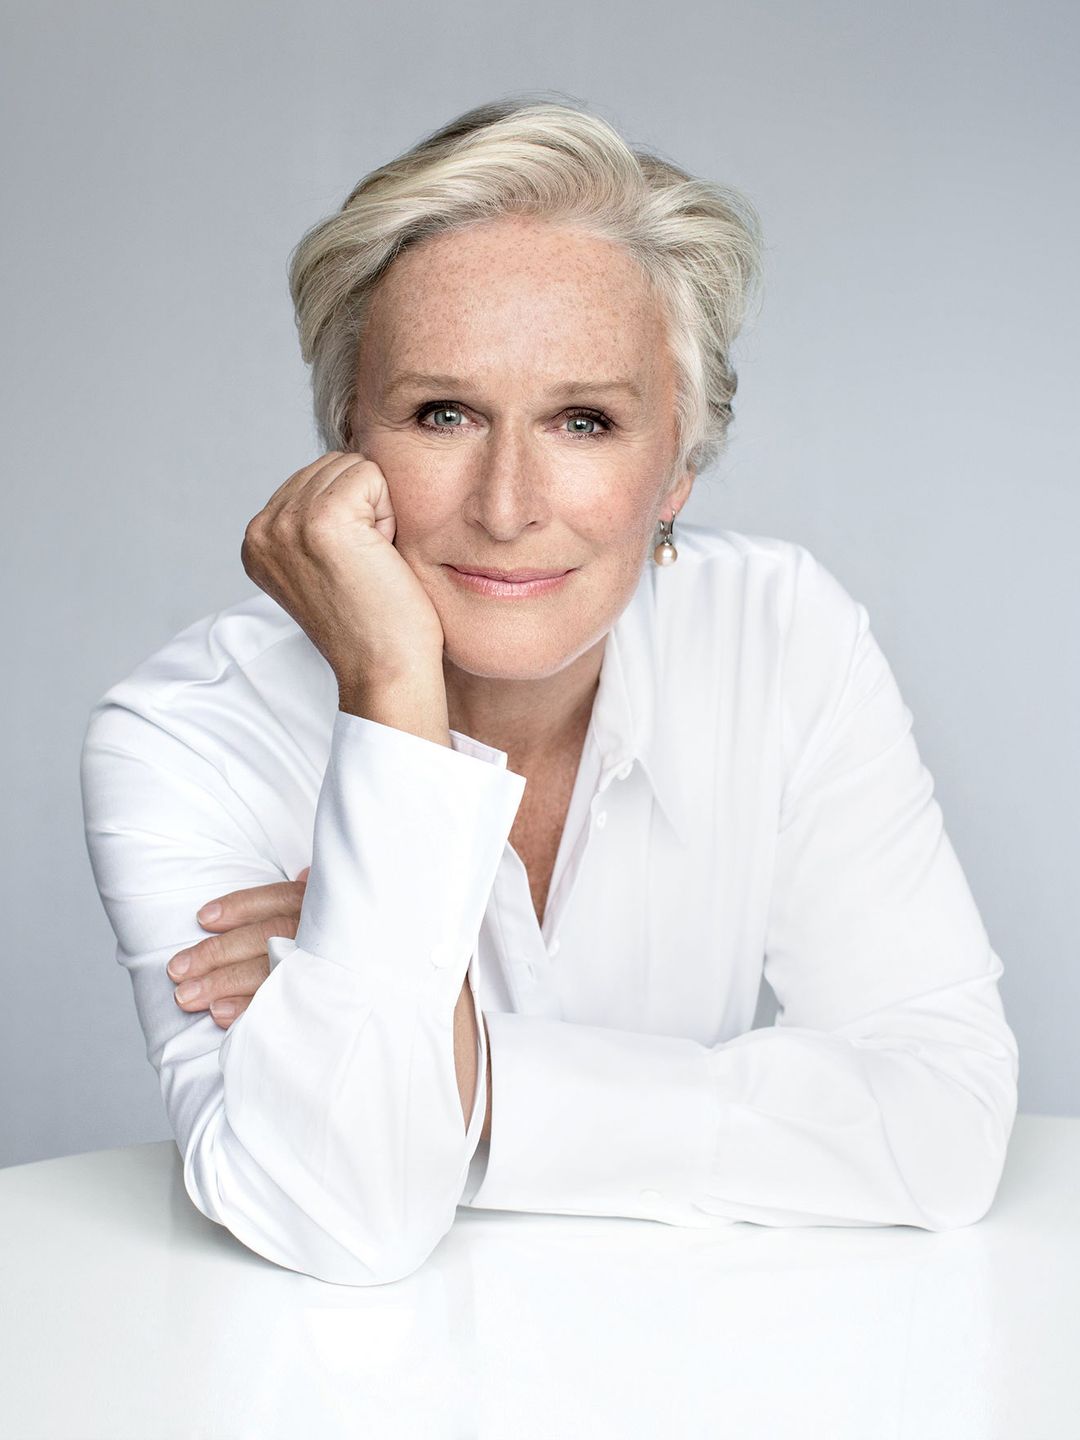 Glenn Close who is her mother